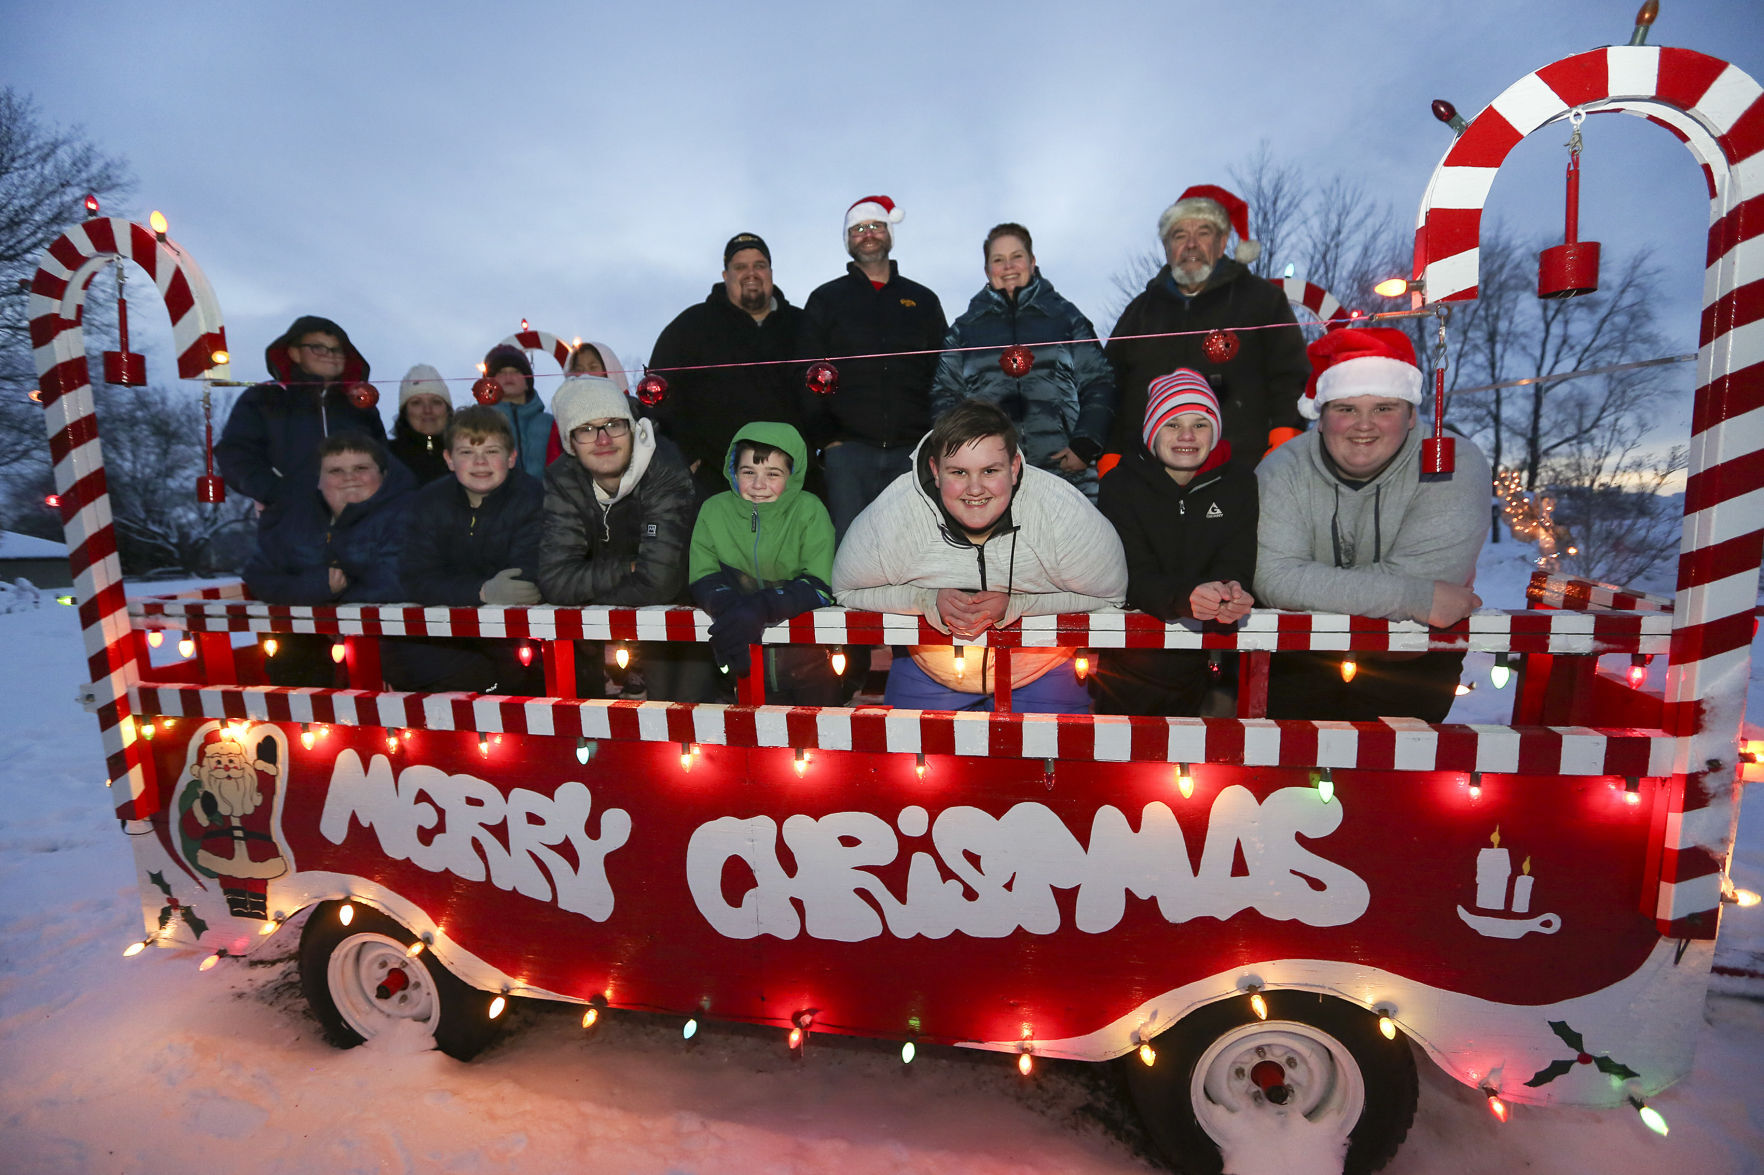 Terry Licht and his family pose for a photo with their Christmas wagon outside his Dubuque home on Tuesday, Dec. 15, 2020. Front, from left: Tate Smith, 12, Teddy Licht, 12, Cole Licht, 16, Oliver Licht, 9, Drew Smith, 13, Wyatt Licht, 12, and Owen Smith, 15. Back, from left: Reed Licht, 11, Sara Licht, Tanner Licht, 8, Emme Smith, 10, Troy Smith, Eli Licht, Courtney (Licht) Smith and Terry Licht. PHOTO CREDIT: NICKI KOHL